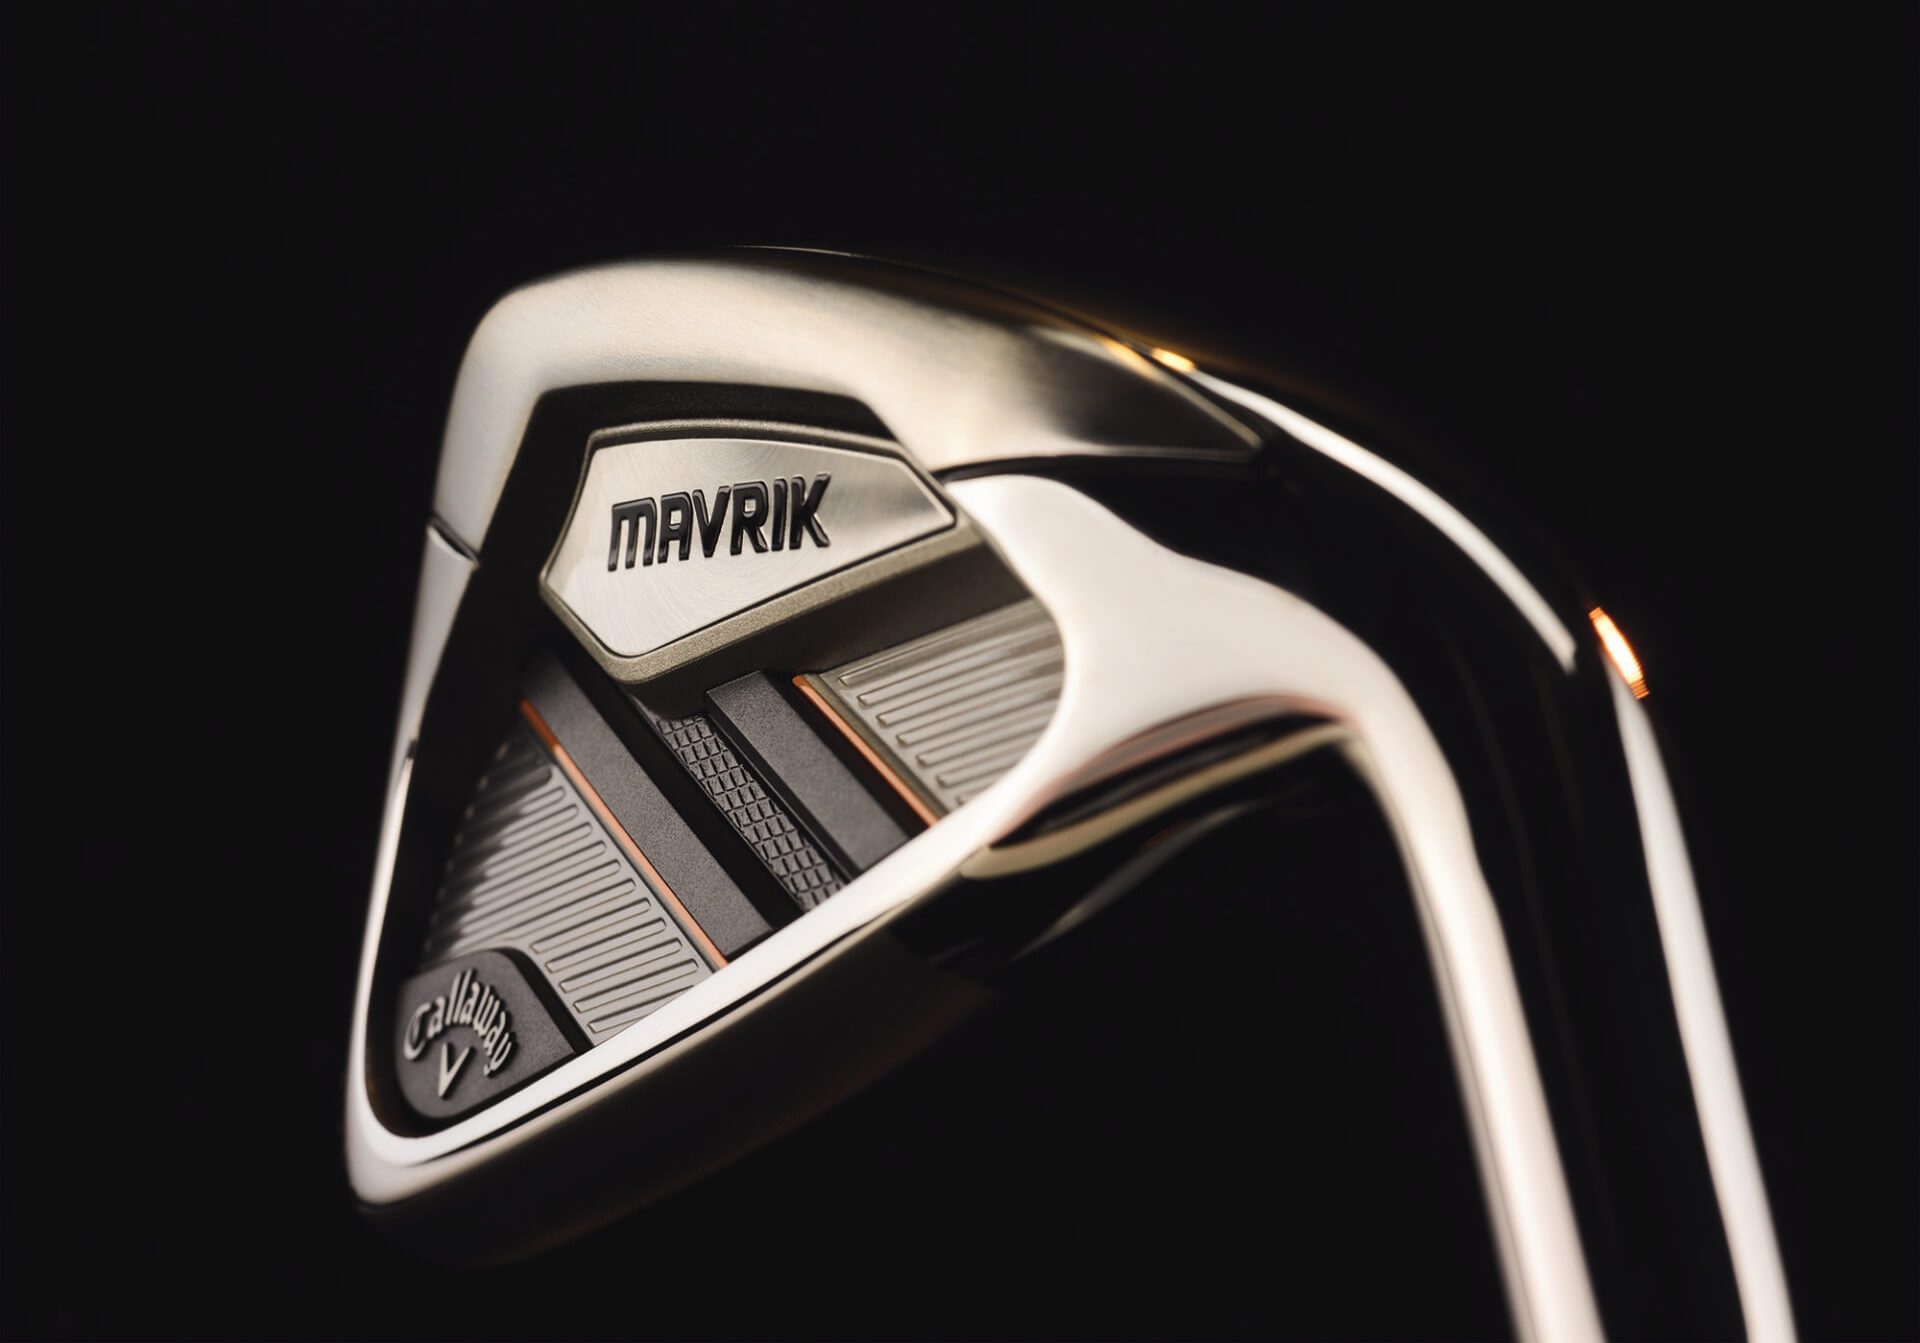 FIRST LOOK: New Callaway Mavrik irons are packed with speed